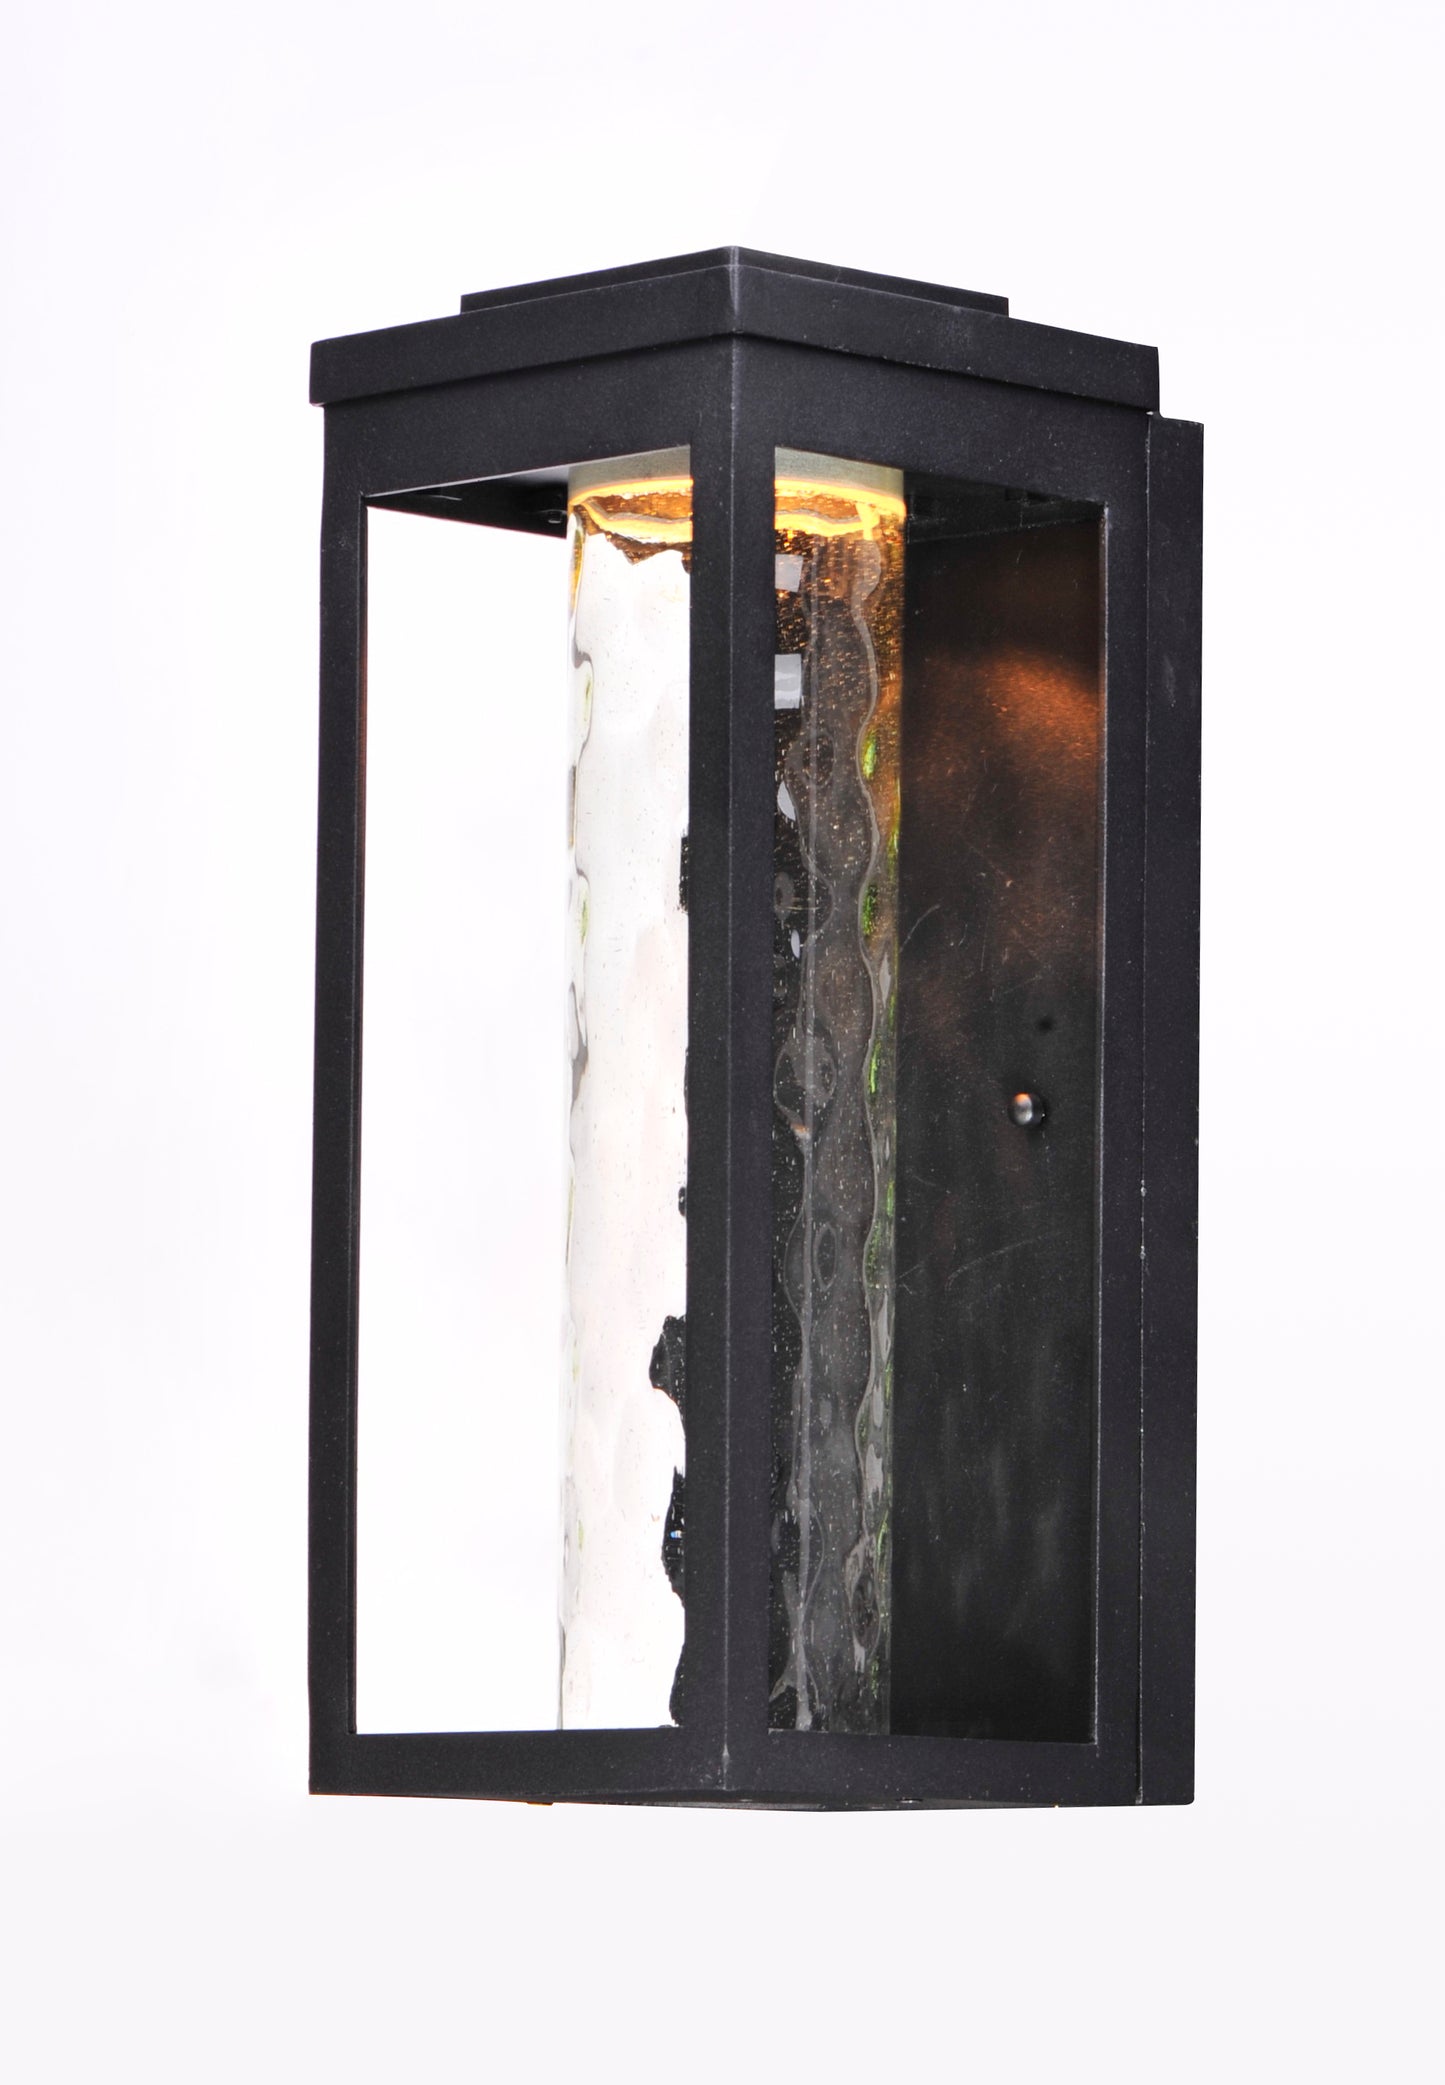 55904WGBK - Salon LED 15" Outdoor Wall Sconce - Black